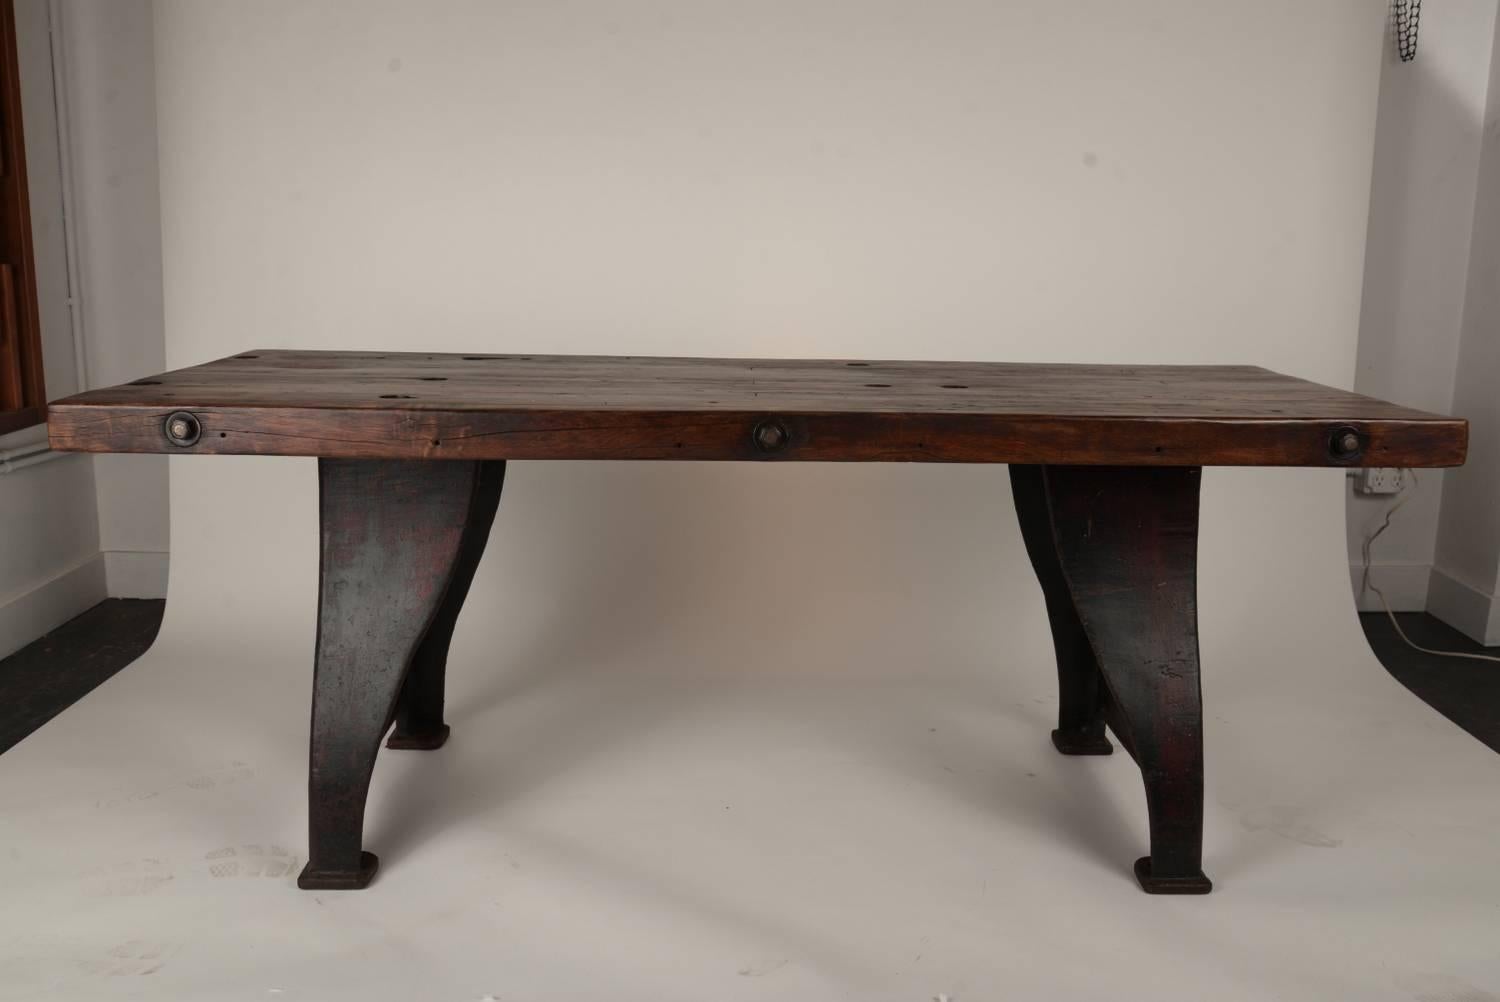 Thick Douglas-fir through bolted wooden top on vintage cast iron. A frame style legs with remnants of original red paint. This piece is super clean and is ready for heavy duty use.